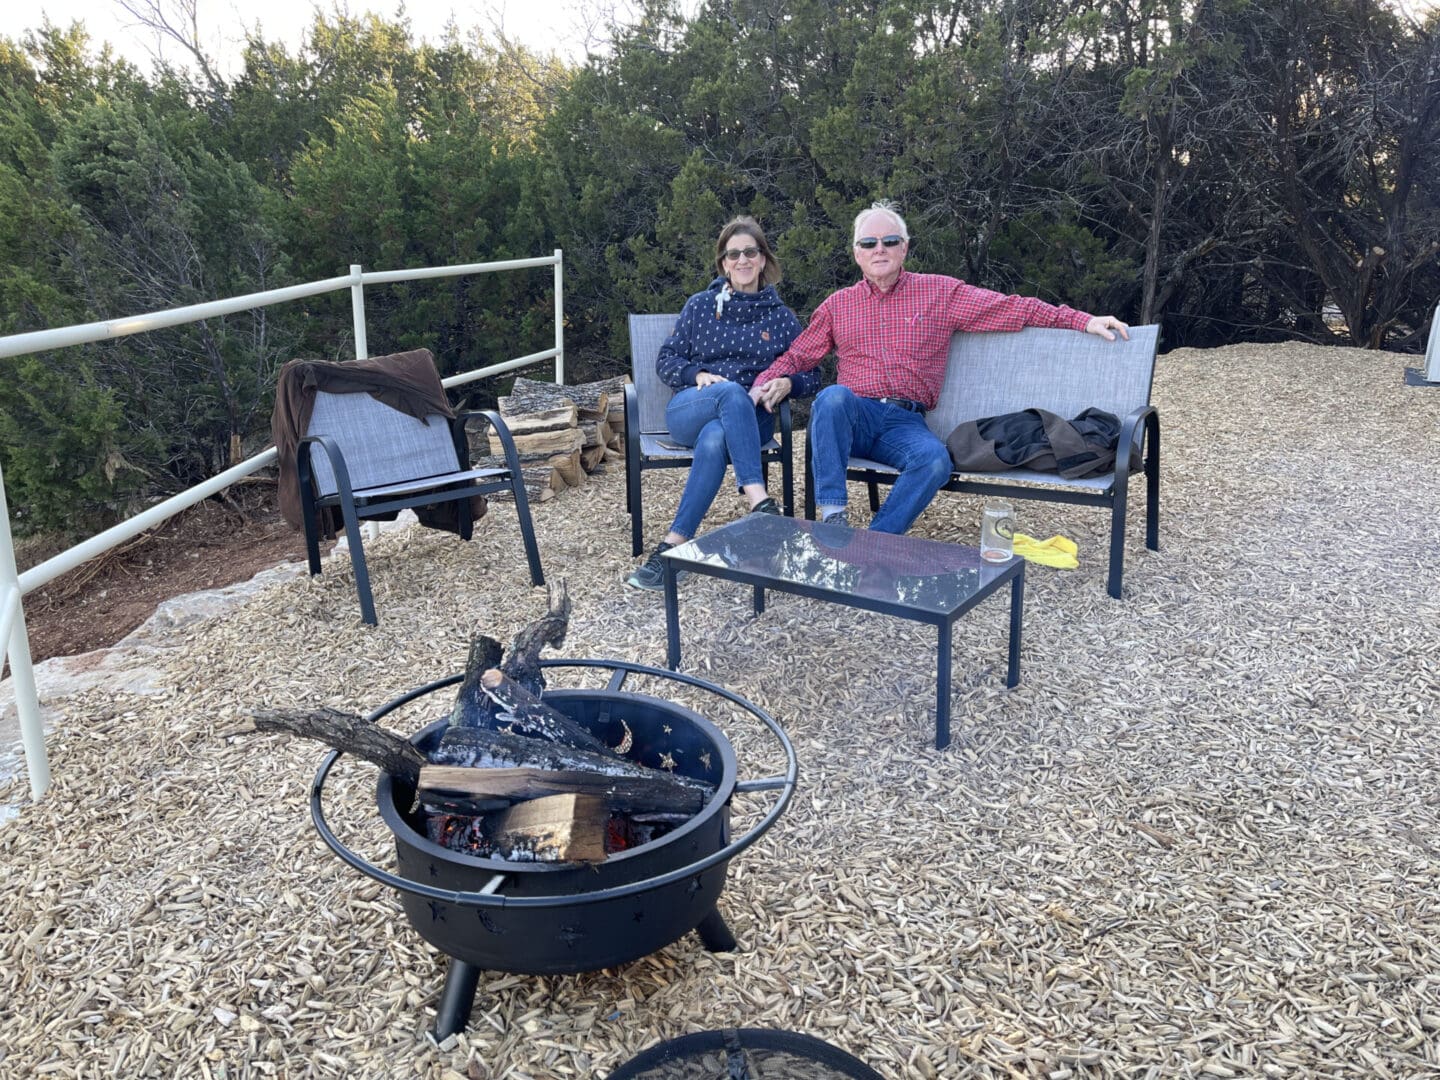 Two people sitting on a bench in front of an outdoor fire pit.